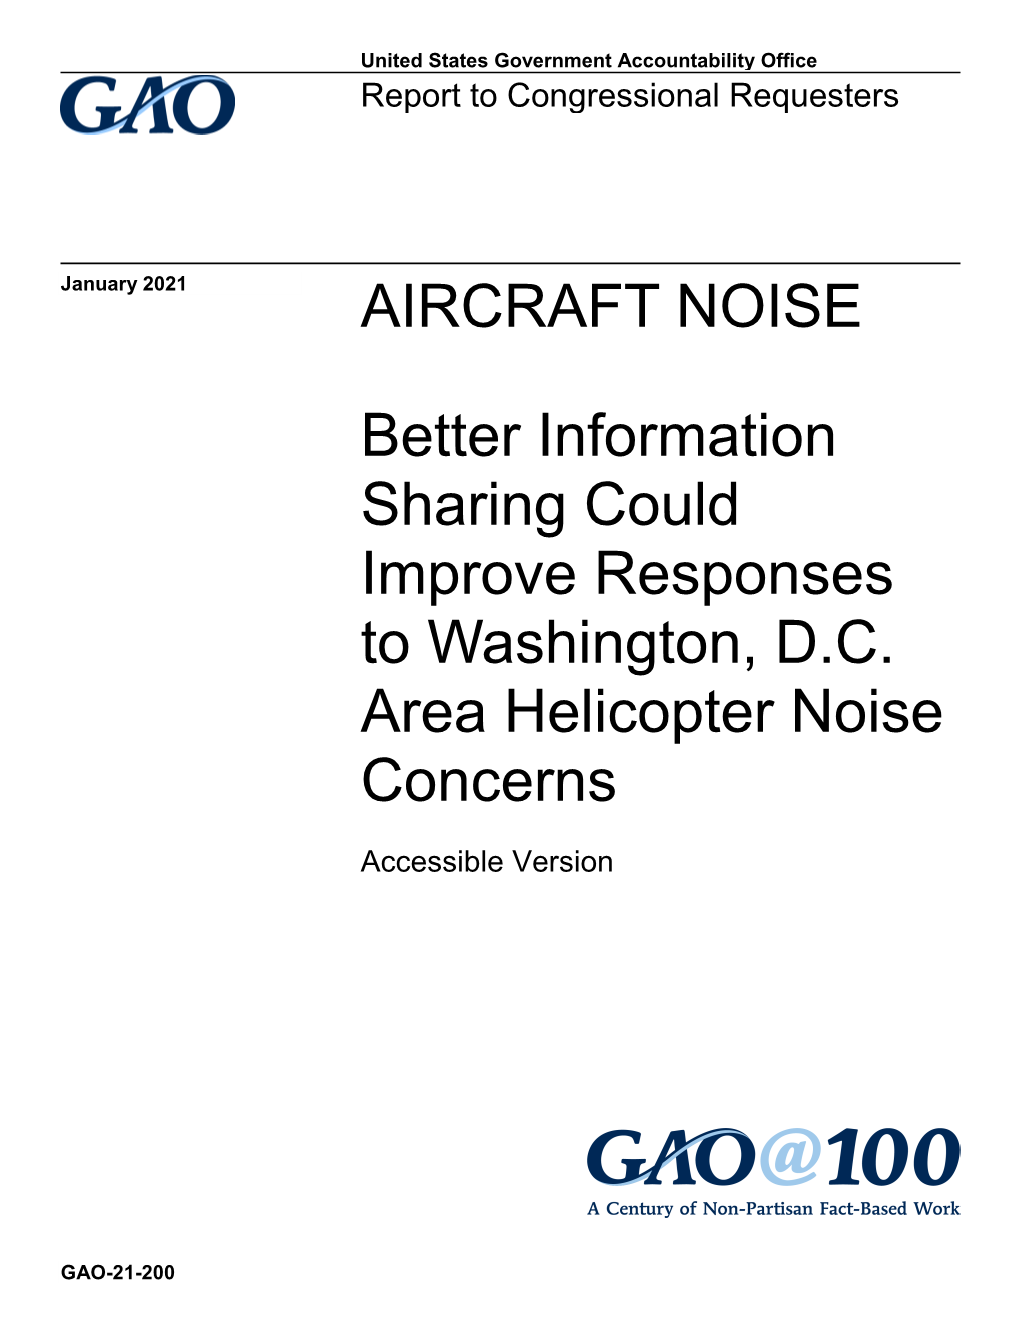 GAO-21-200, Accessible Version, AIRCRAFT NOISE